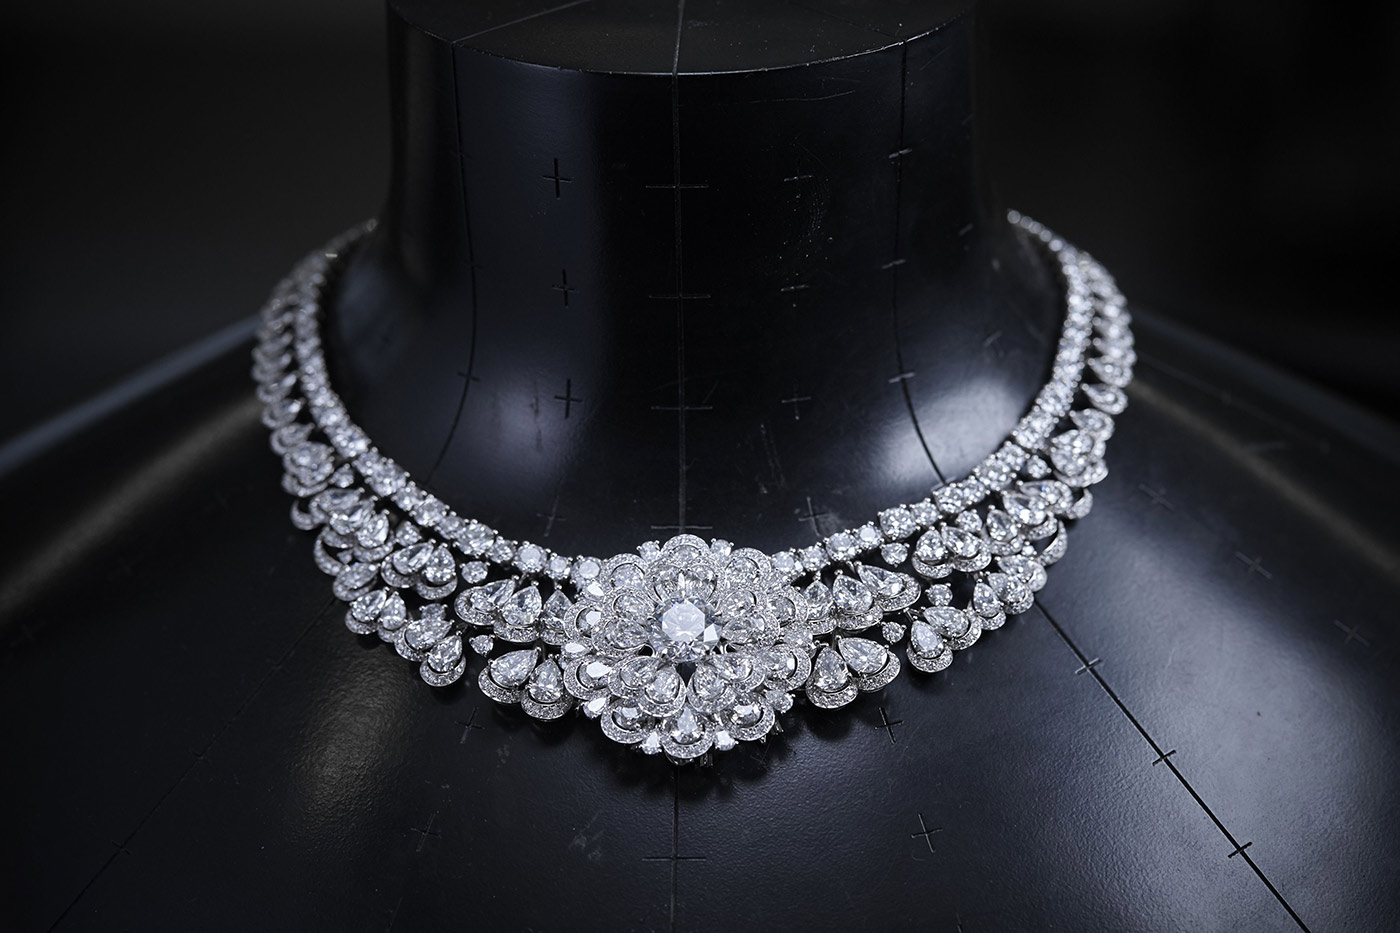 Chopard 'Queen of Kalahari' necklace with pear and brilliant cut diamonds